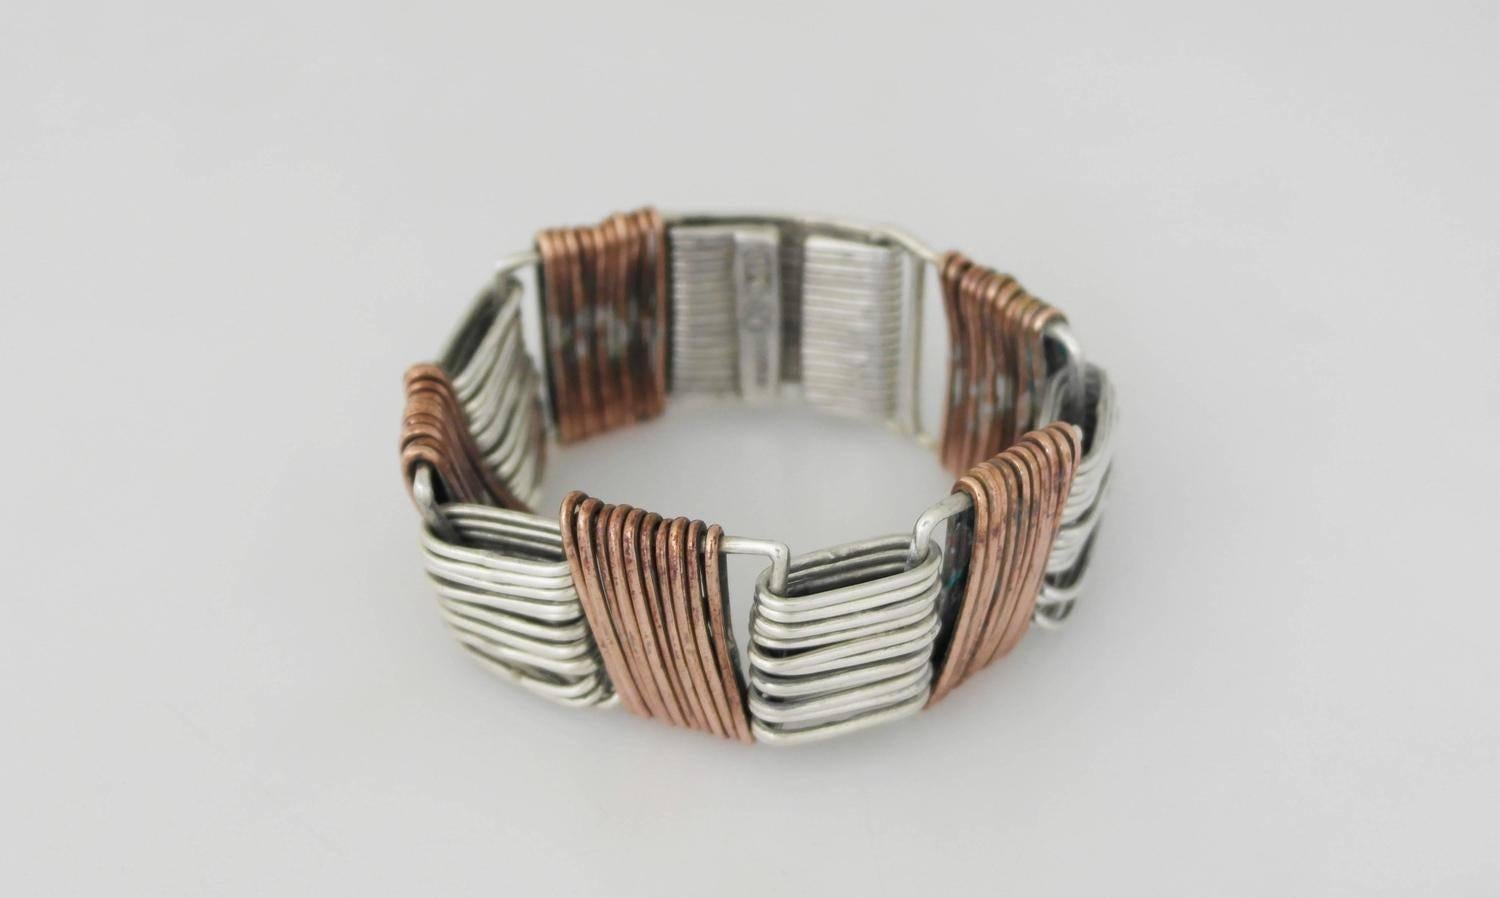 RARE Aguilar Copper Sterling Silver Bracelet VISIT LAUREN STANLEY 4 MEX JEWELRYL In Excellent Condition For Sale In New York, NY